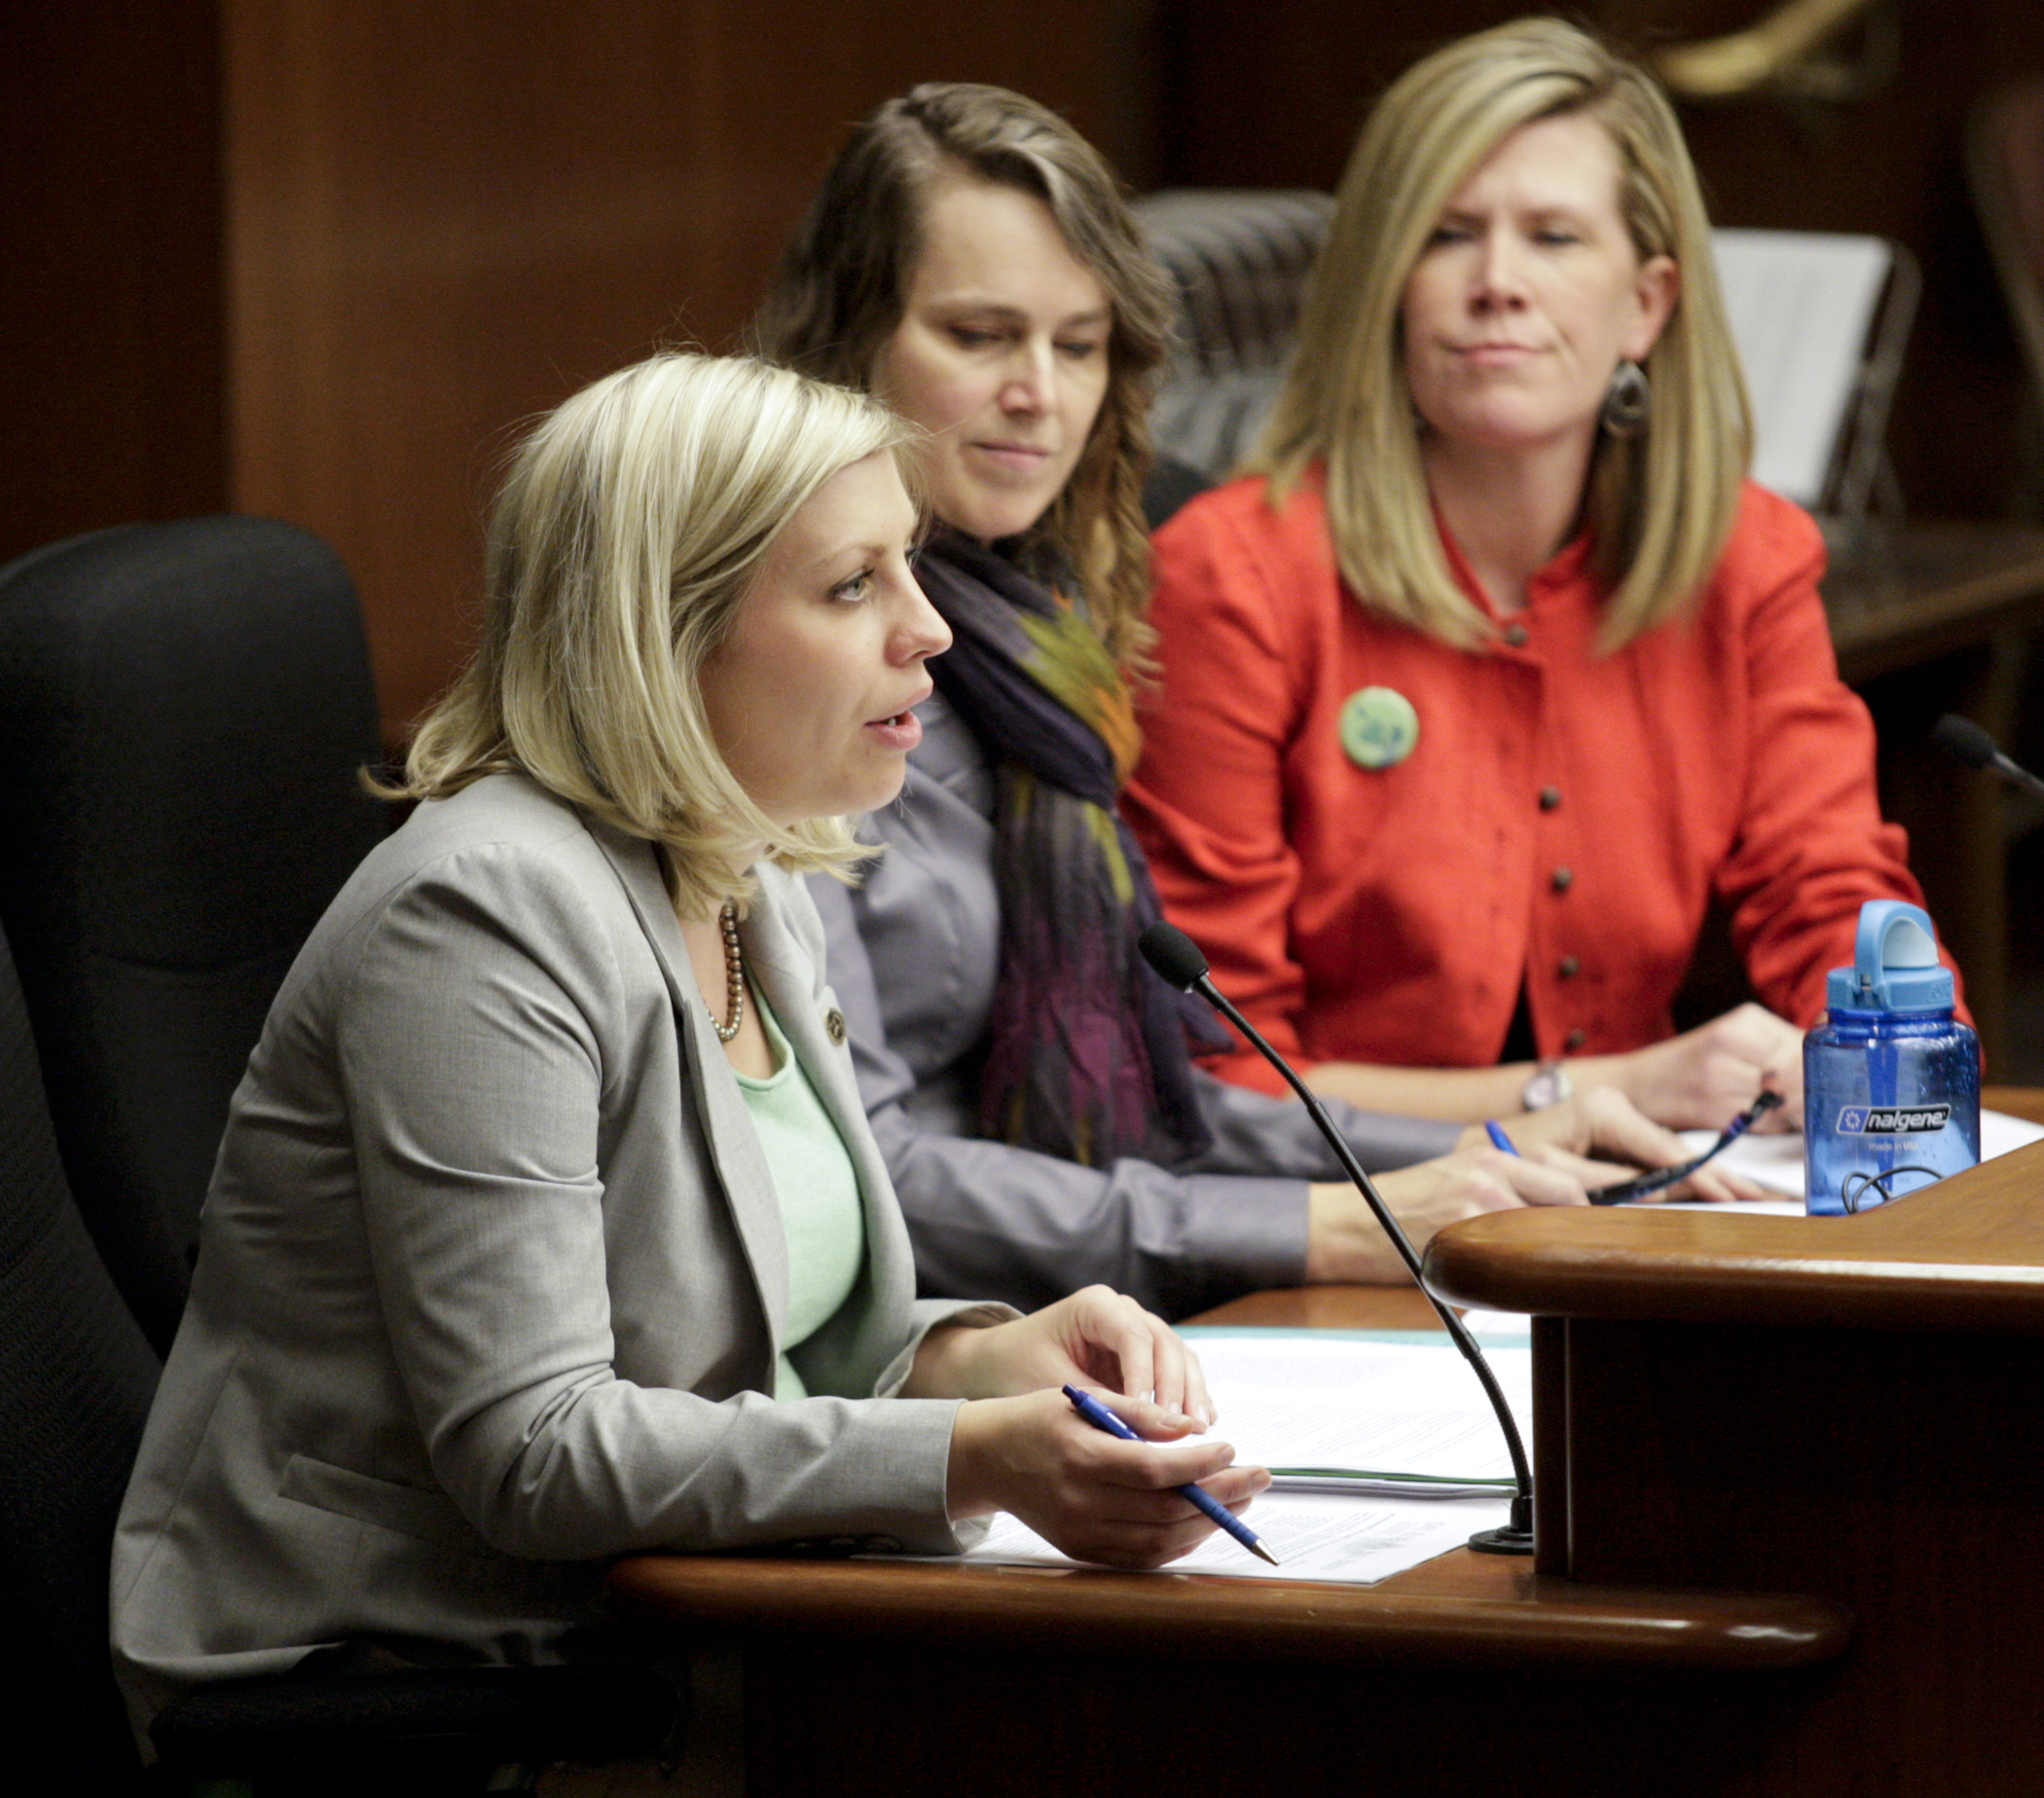 Rep. Carly Melin presents her bill, HF2536, the Women’s Economic Security Act, to the House Jobs and Economic Development Finance and Policy Committee March 20. With her are Debra Fitzpatrick, center, director of the Center on Women and Public Policy at the Humphrey School of Public Affairs, and Kim Borton, director of programs for the Women’s Foundation of Minnesota. Photo by Paul Battaglia